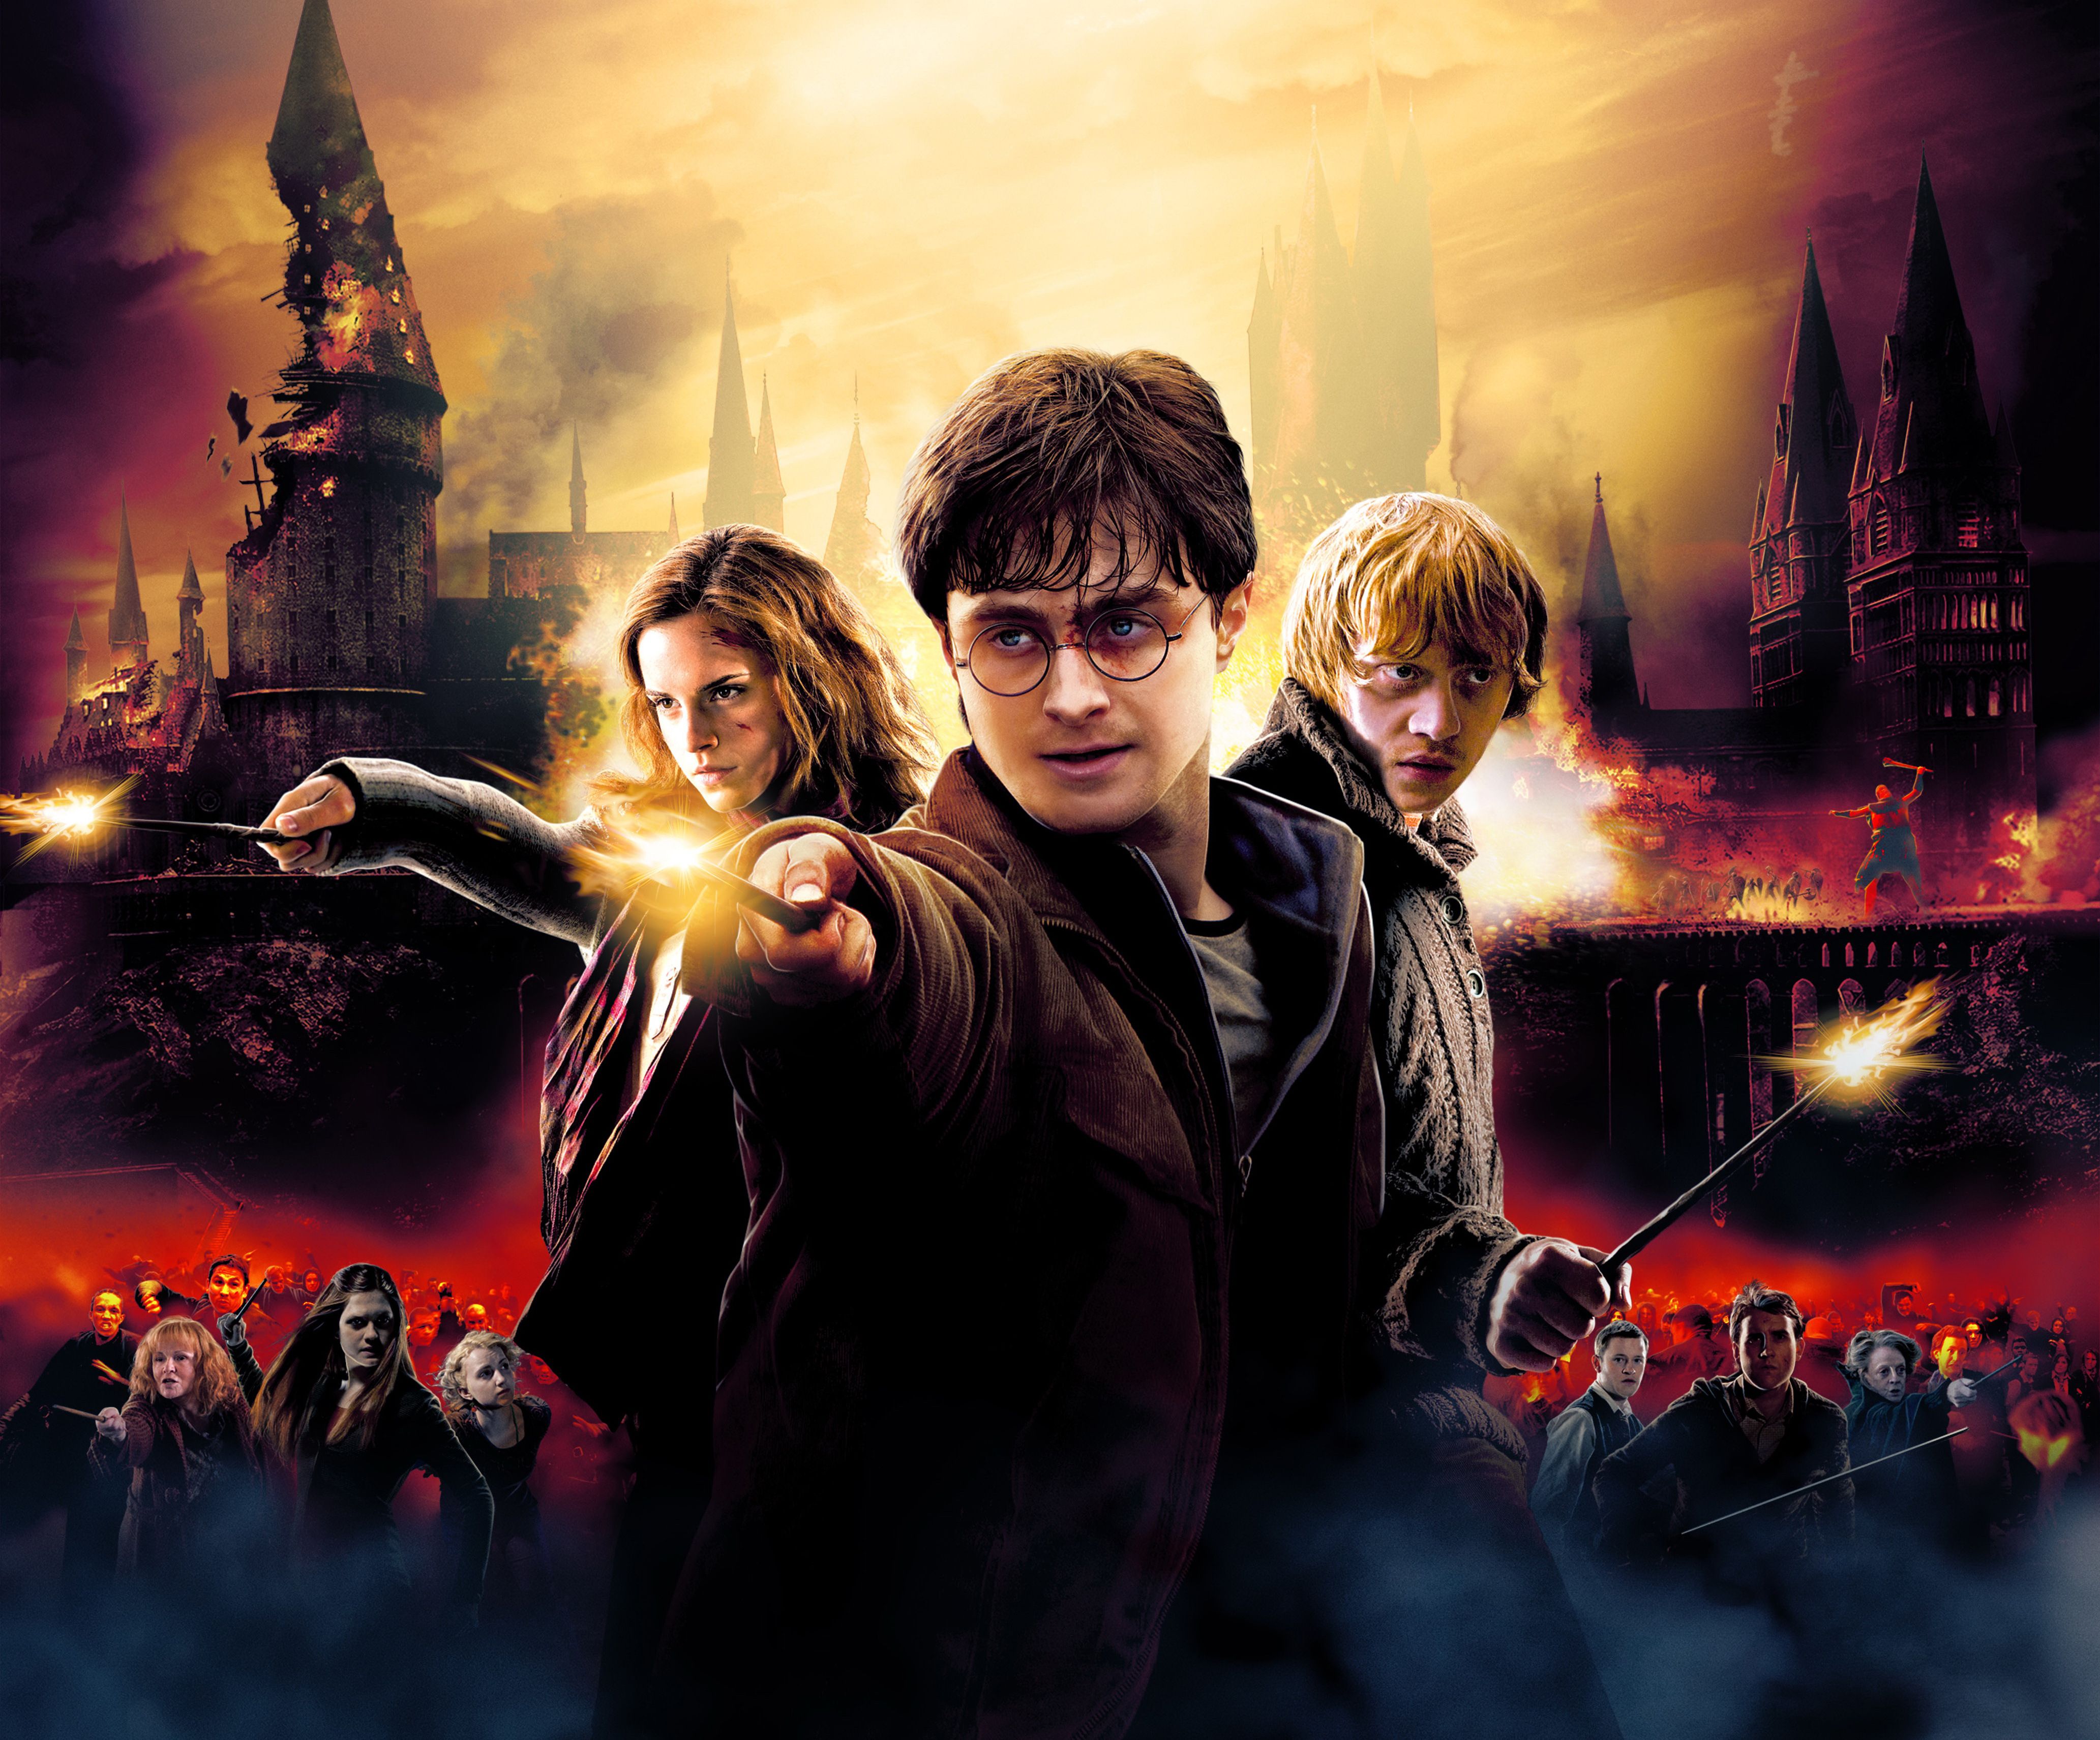 Wallpapers Harry Potter and the Deathly Hallows, Daniel Radcliffe